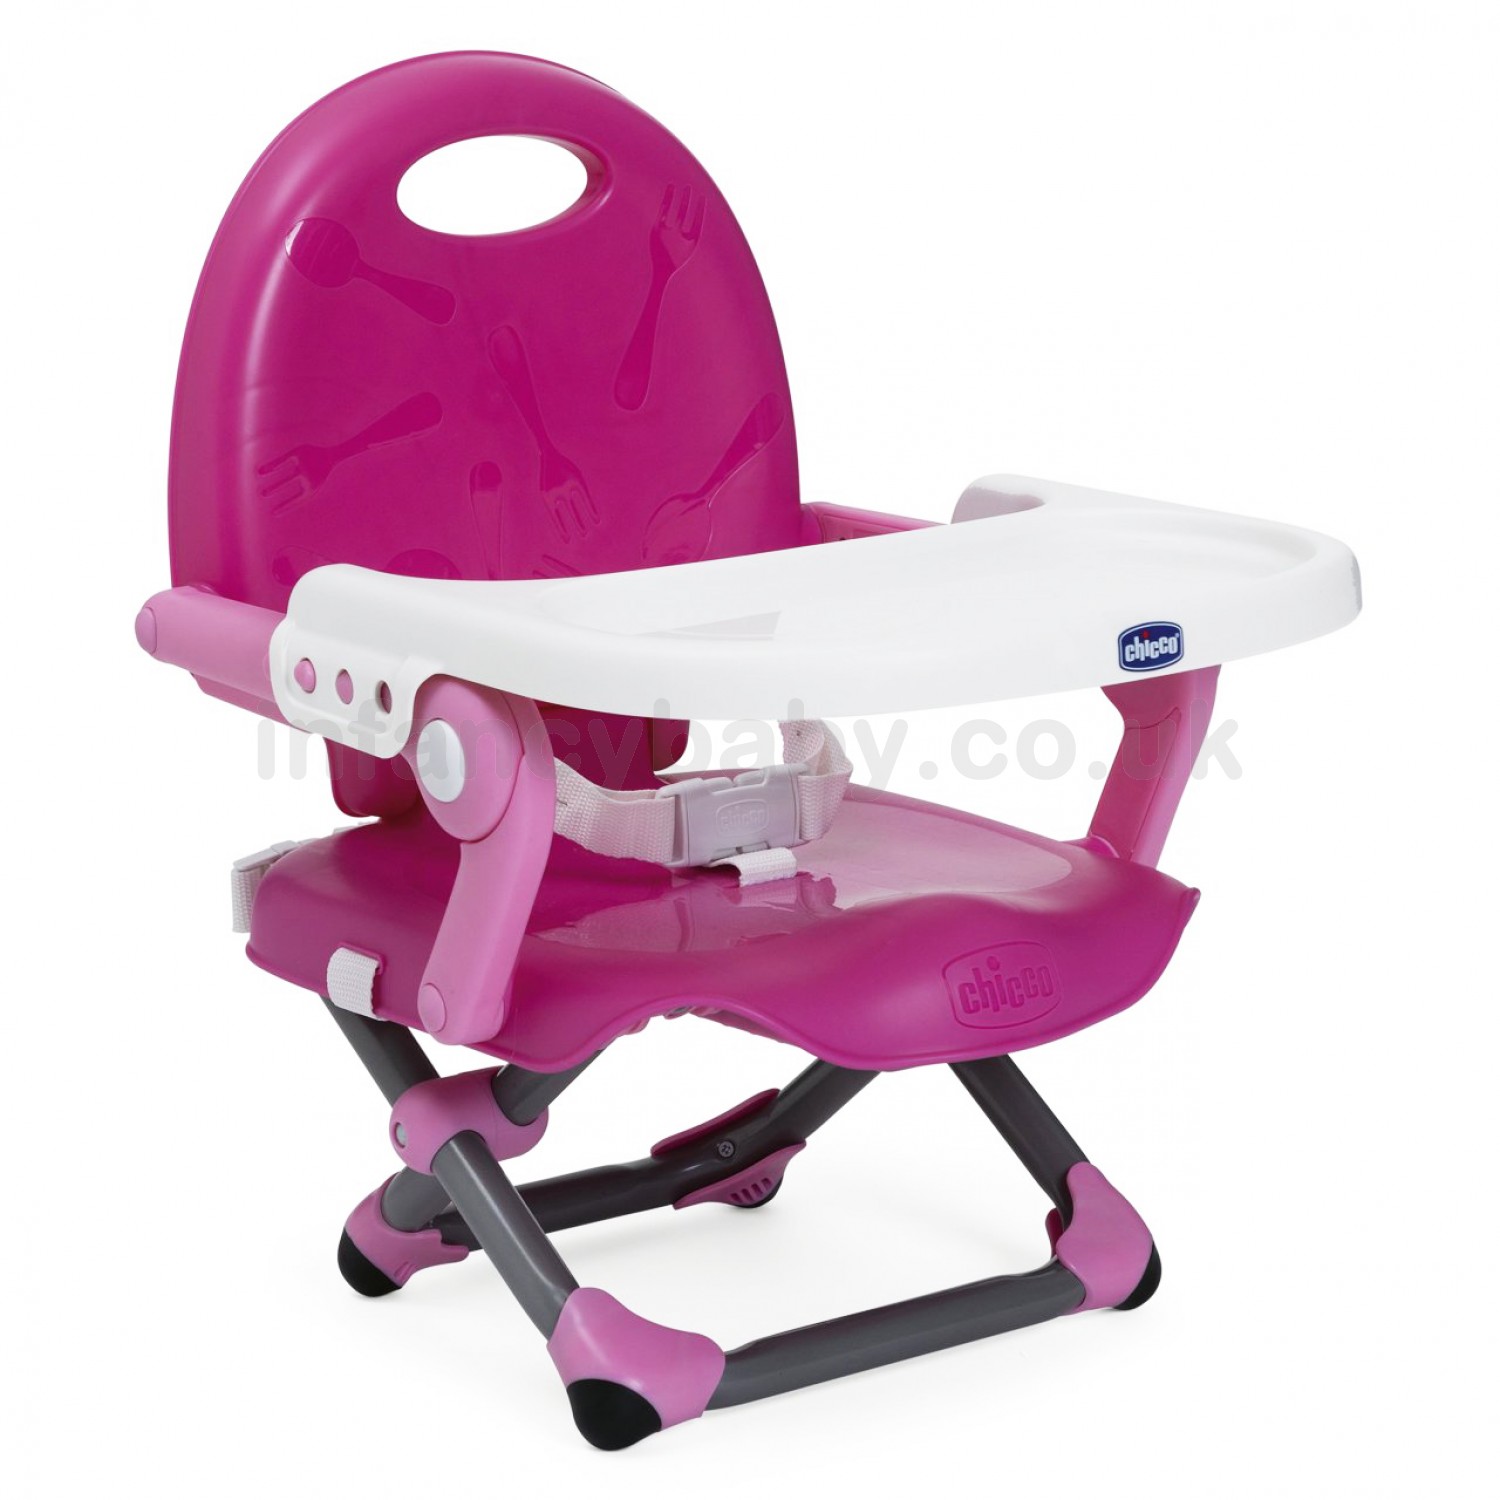 Chicco Pocket Snack Booster Seat- Pink